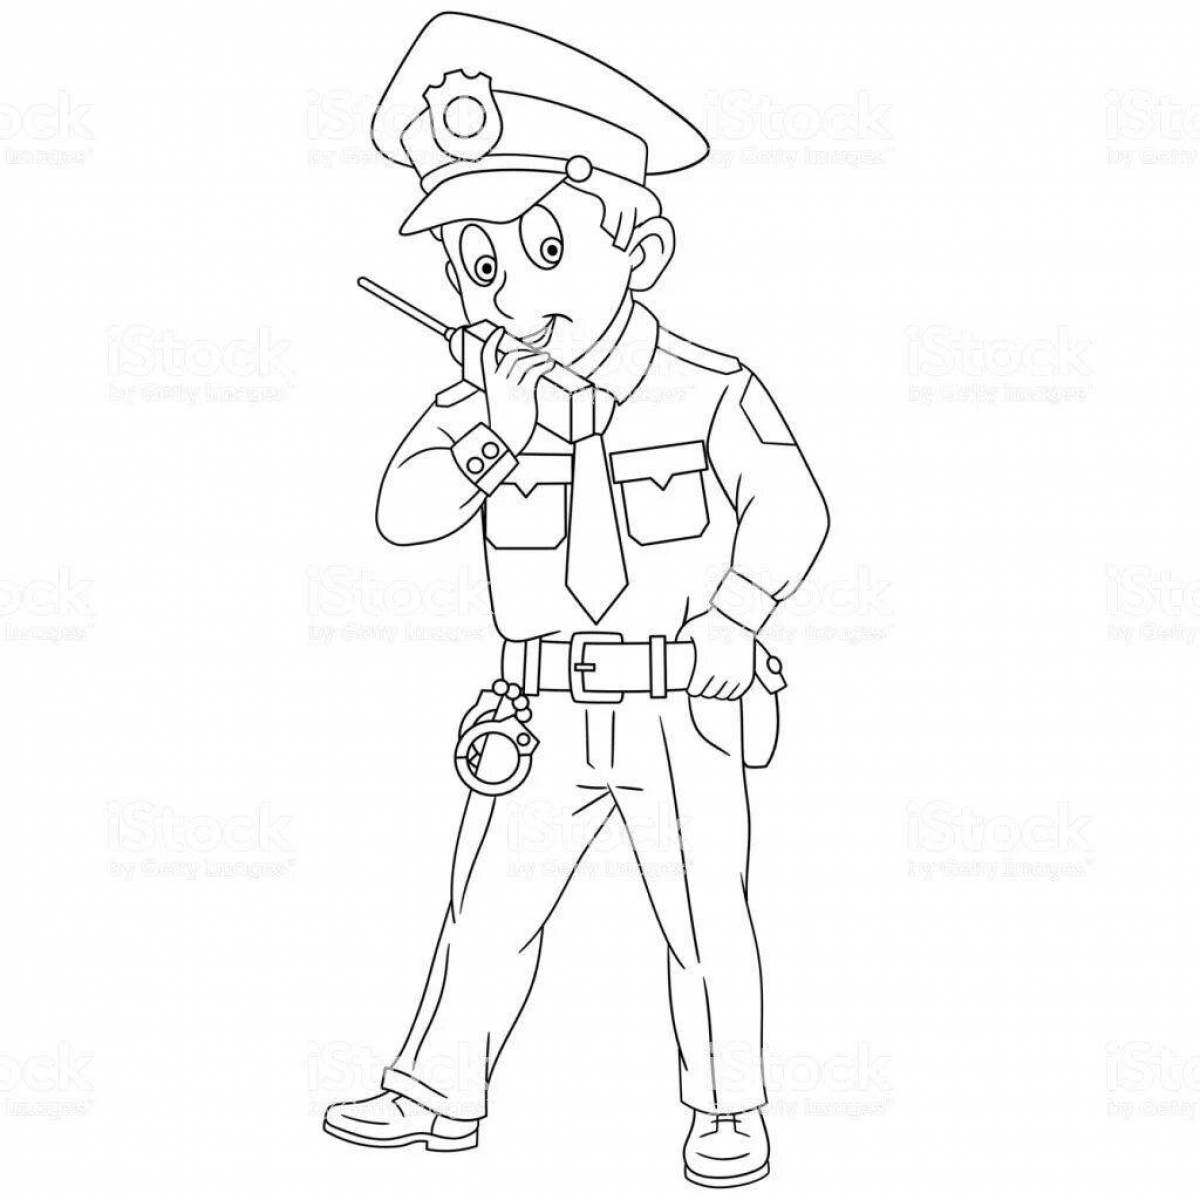 Police figurine grand coloring page